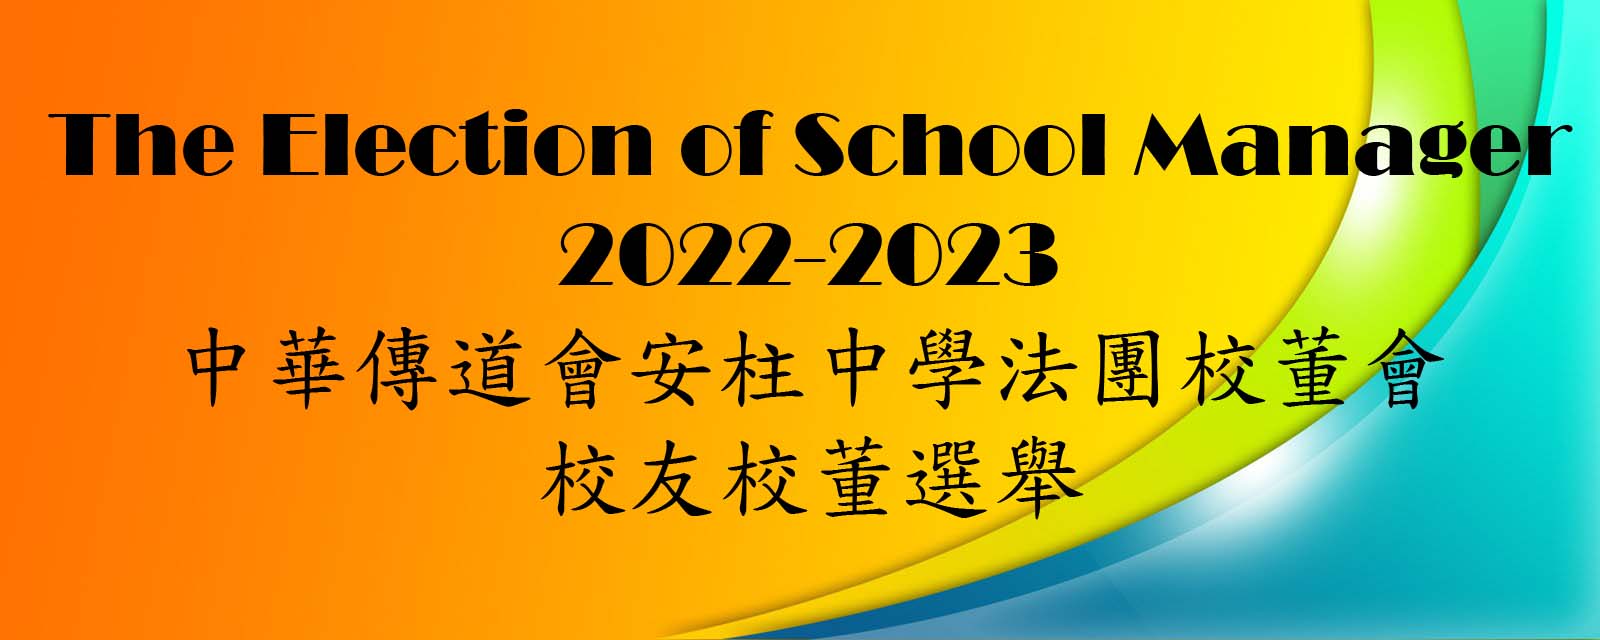 The Election of School Manager 2022-2023